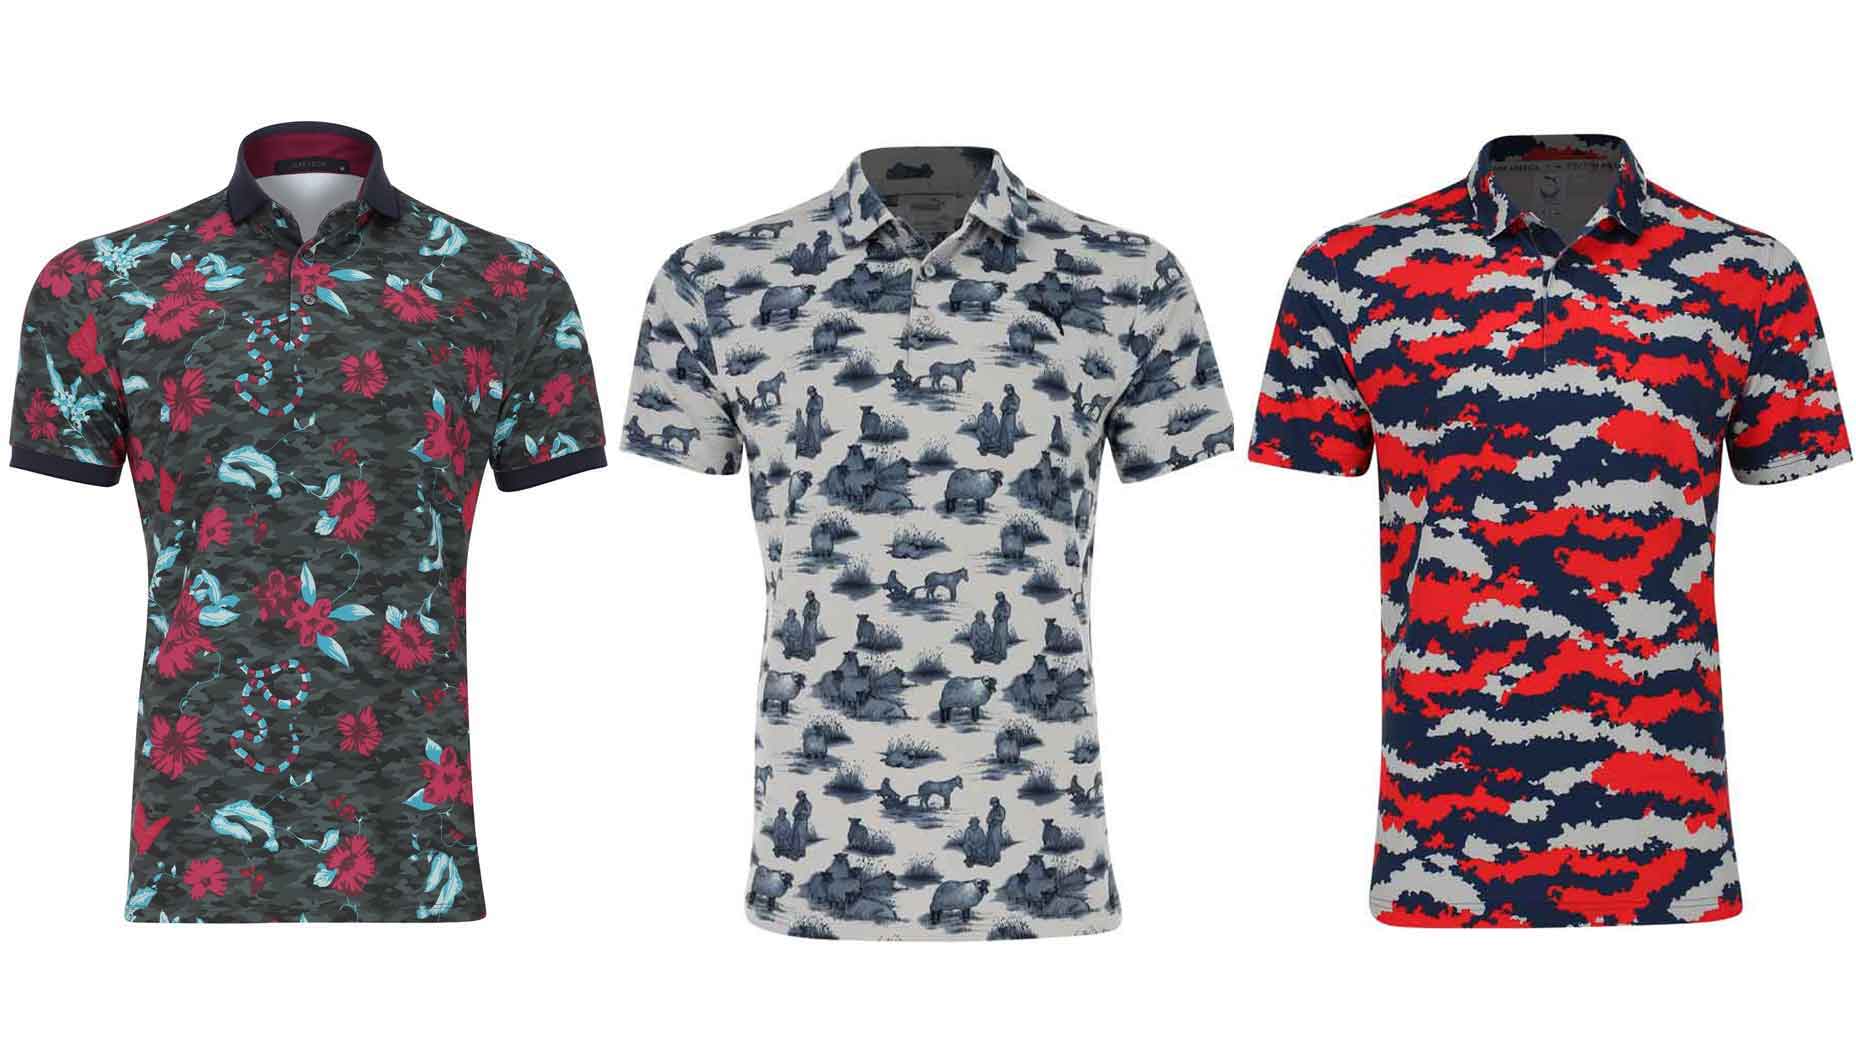 10 stylish printed polos you need to add to